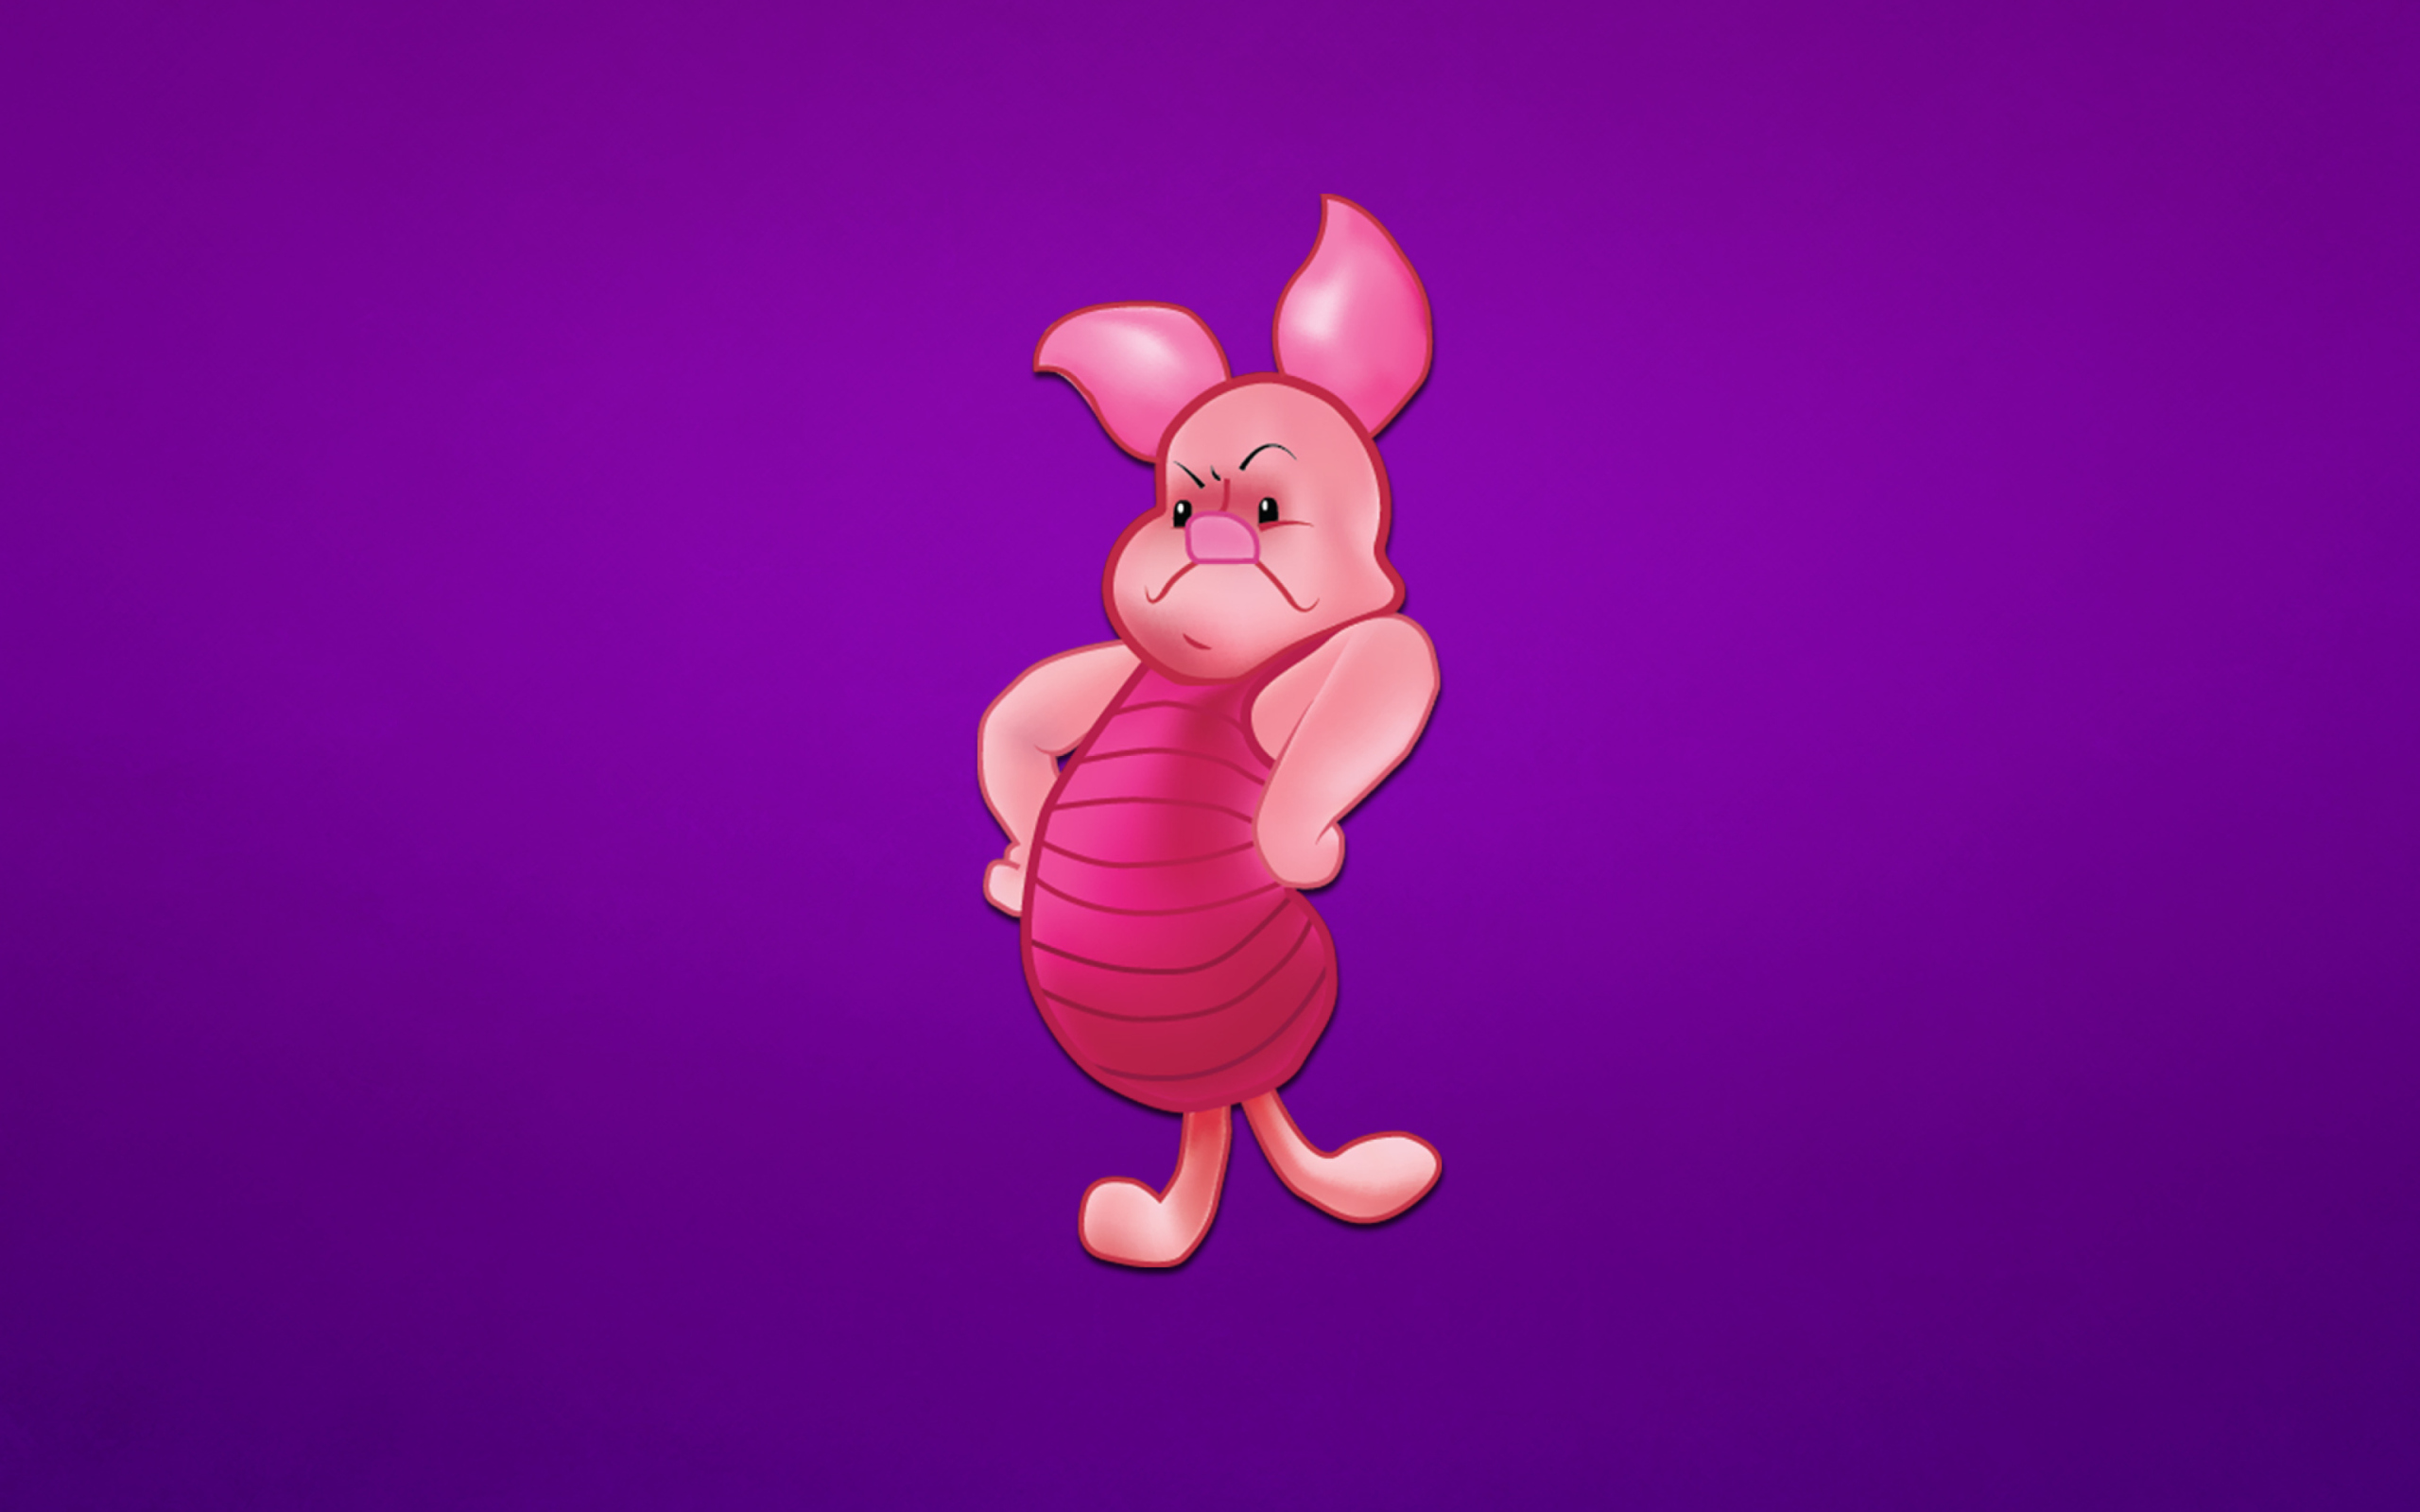 Angry Piglet wallpaper 2560x1600